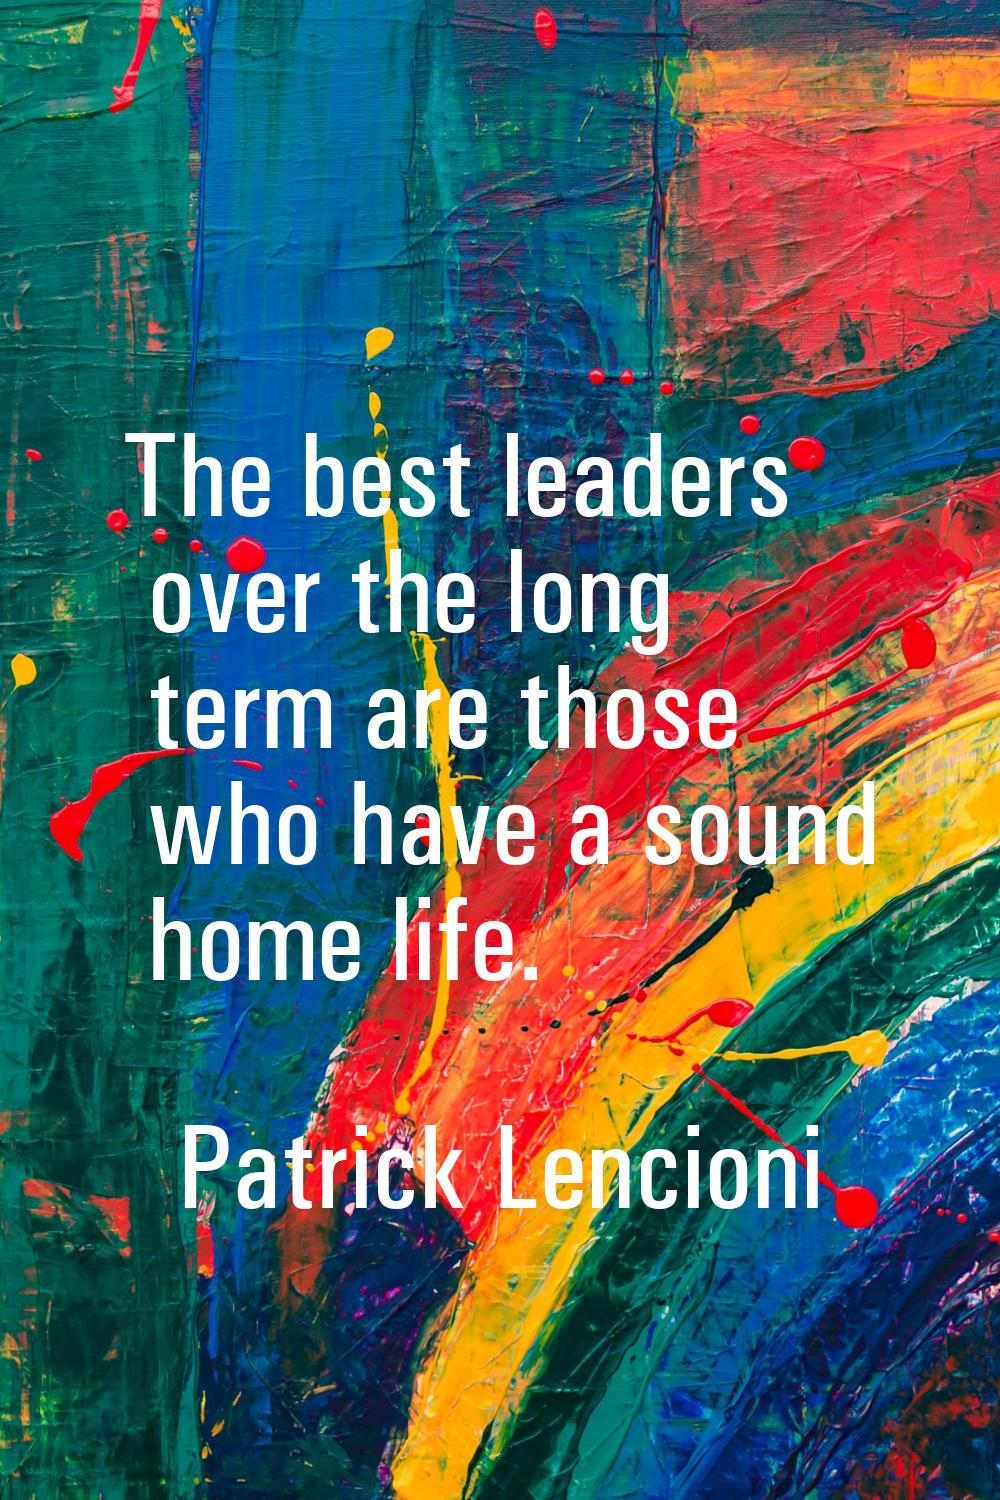 The best leaders over the long term are those who have a sound home life.